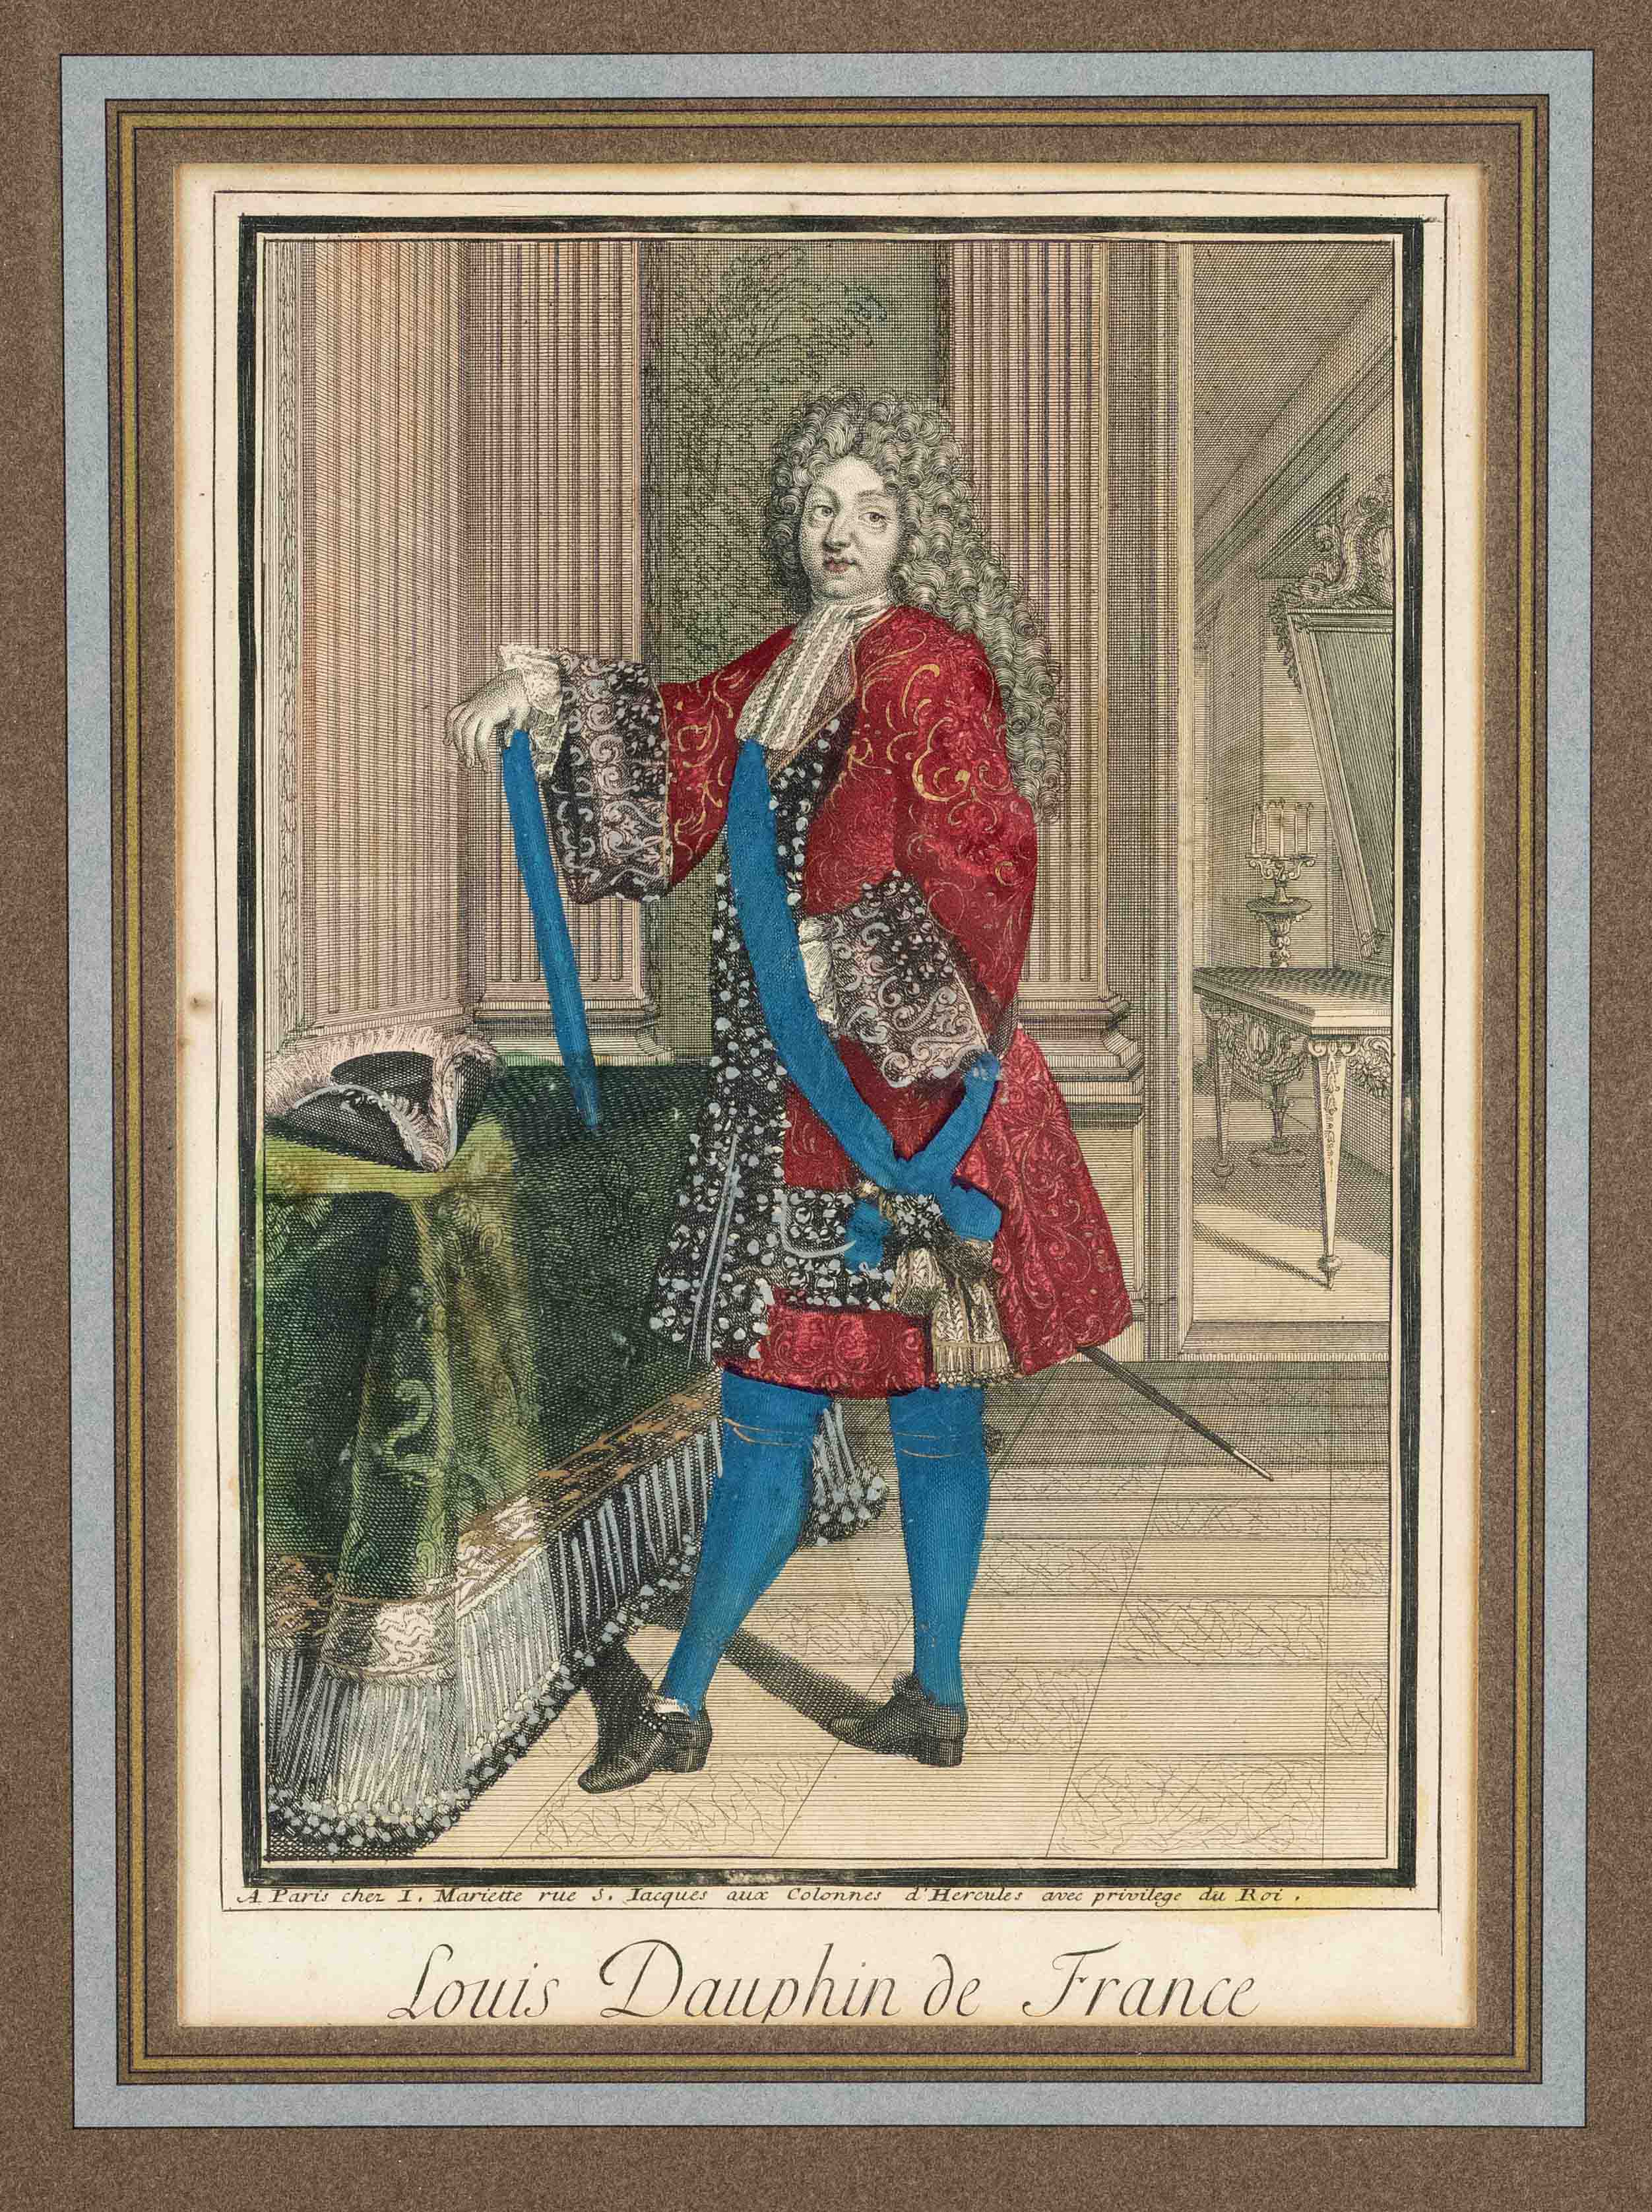 Three colored portrait copperplates of the 18th century, full-figure portraits of rulers of Louis